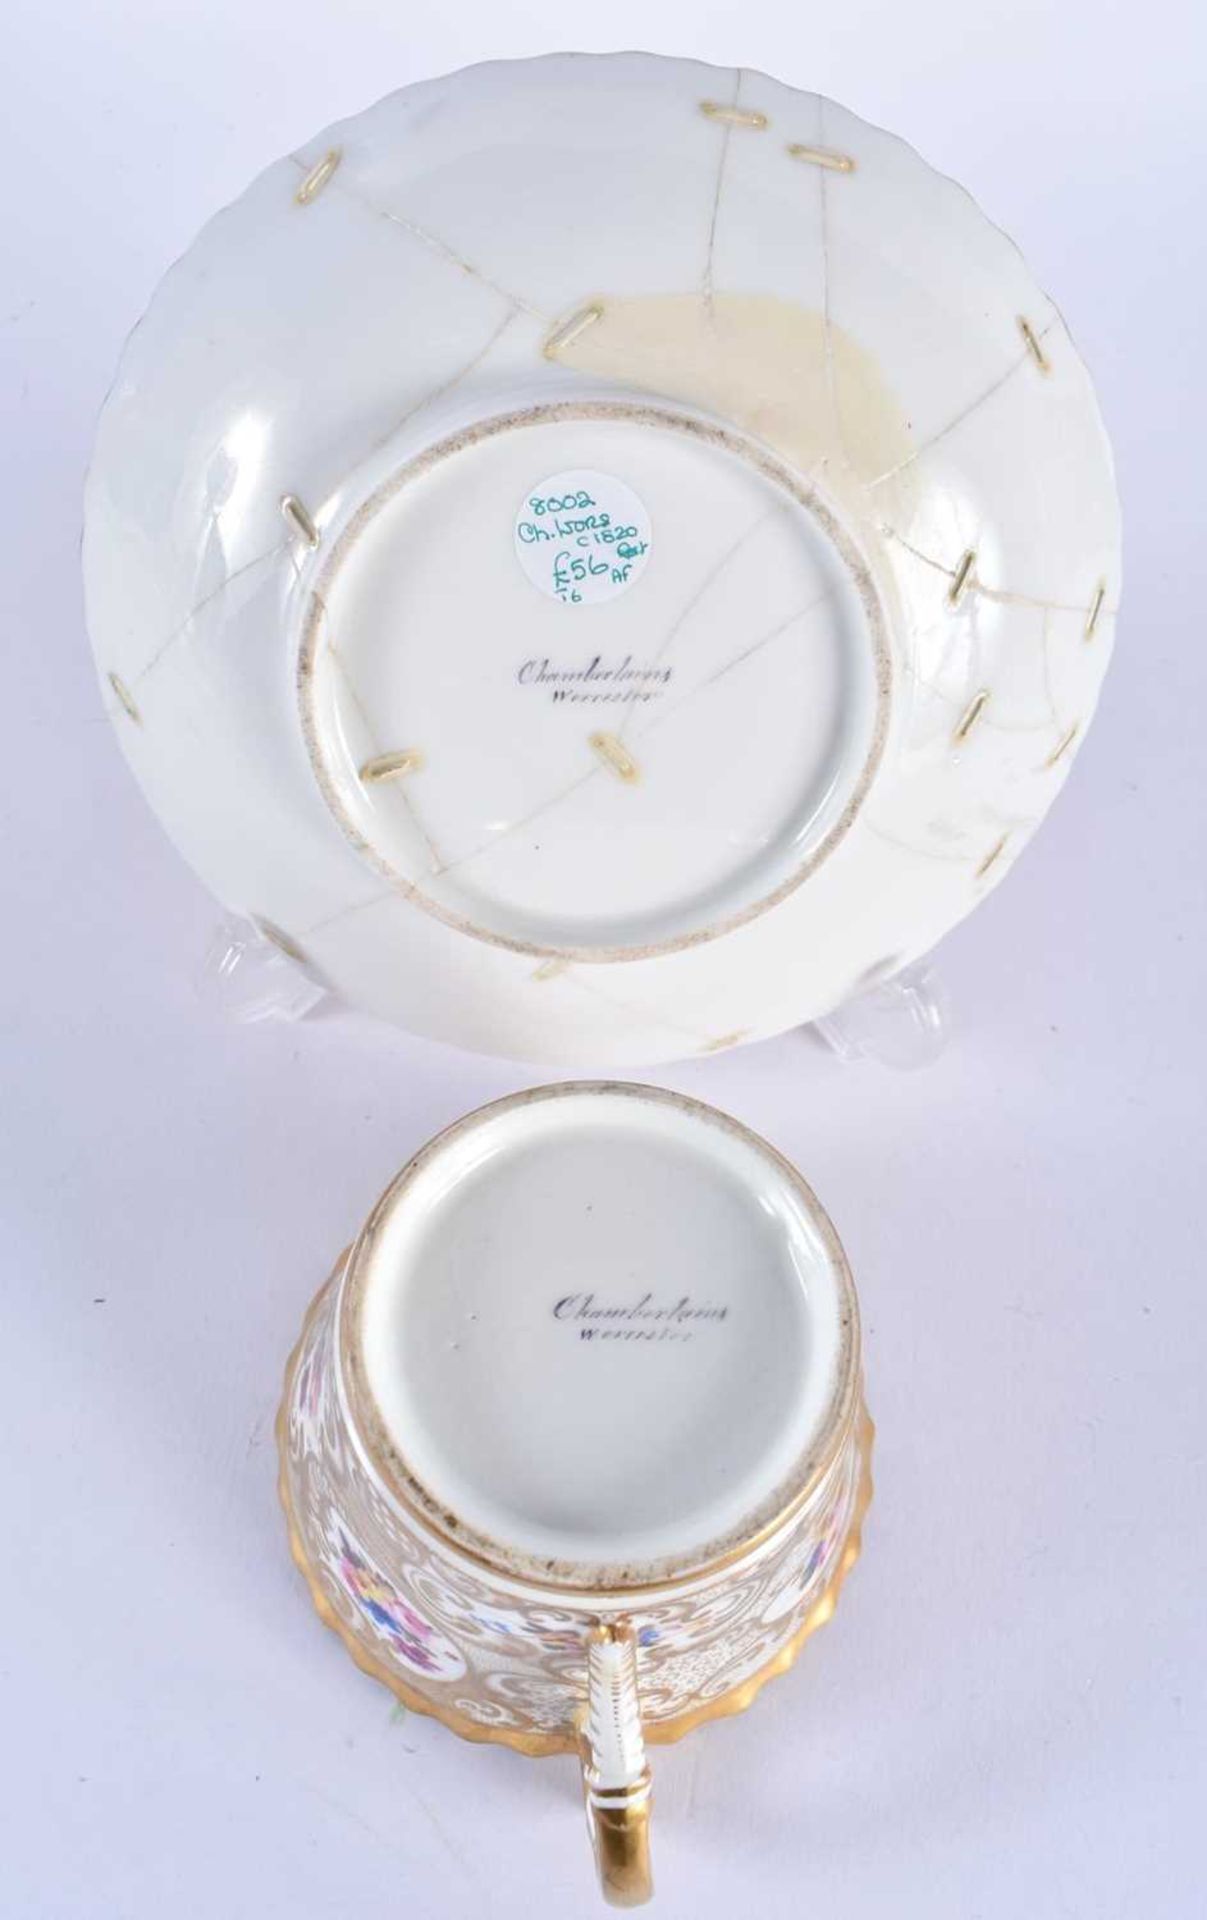 THREE EARLY 19TH CENTURY CHAMBERLAINS WORCESTER PORCELAIN CUPS AND SAUCERS painted with armorials - Image 7 of 31